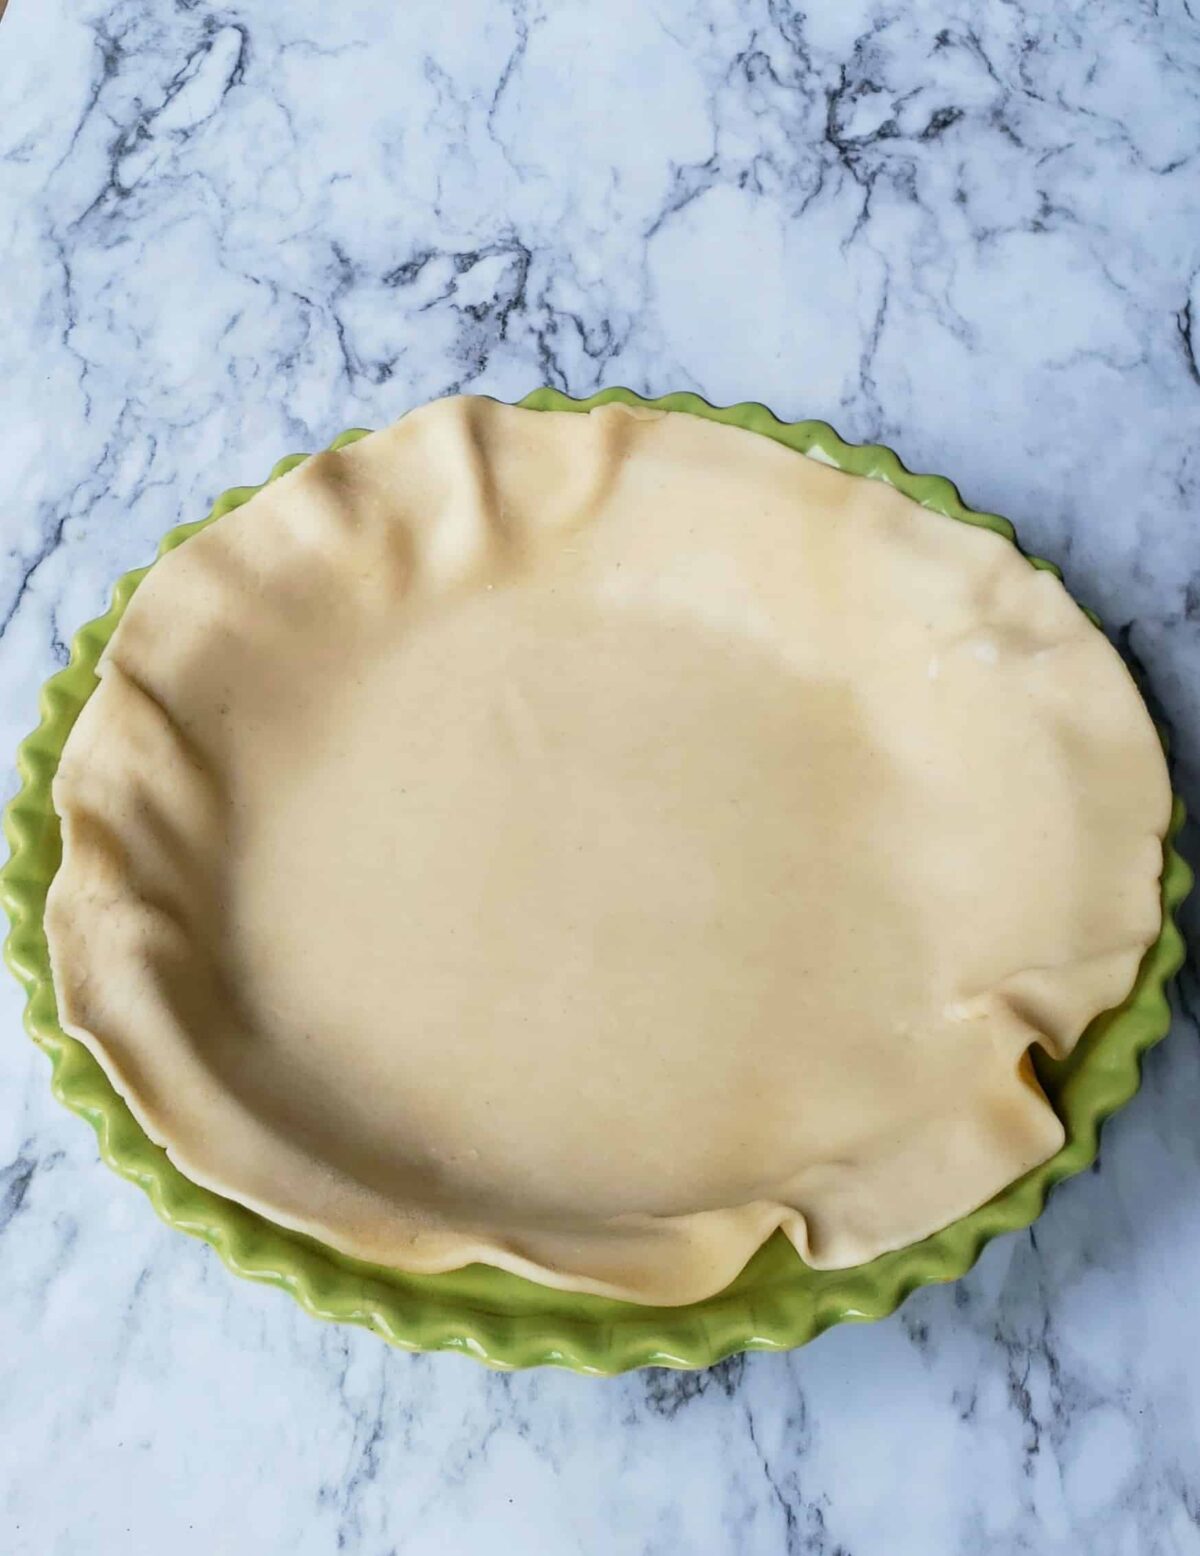 Fitted the pie crust into the bottom of a green pie plate.